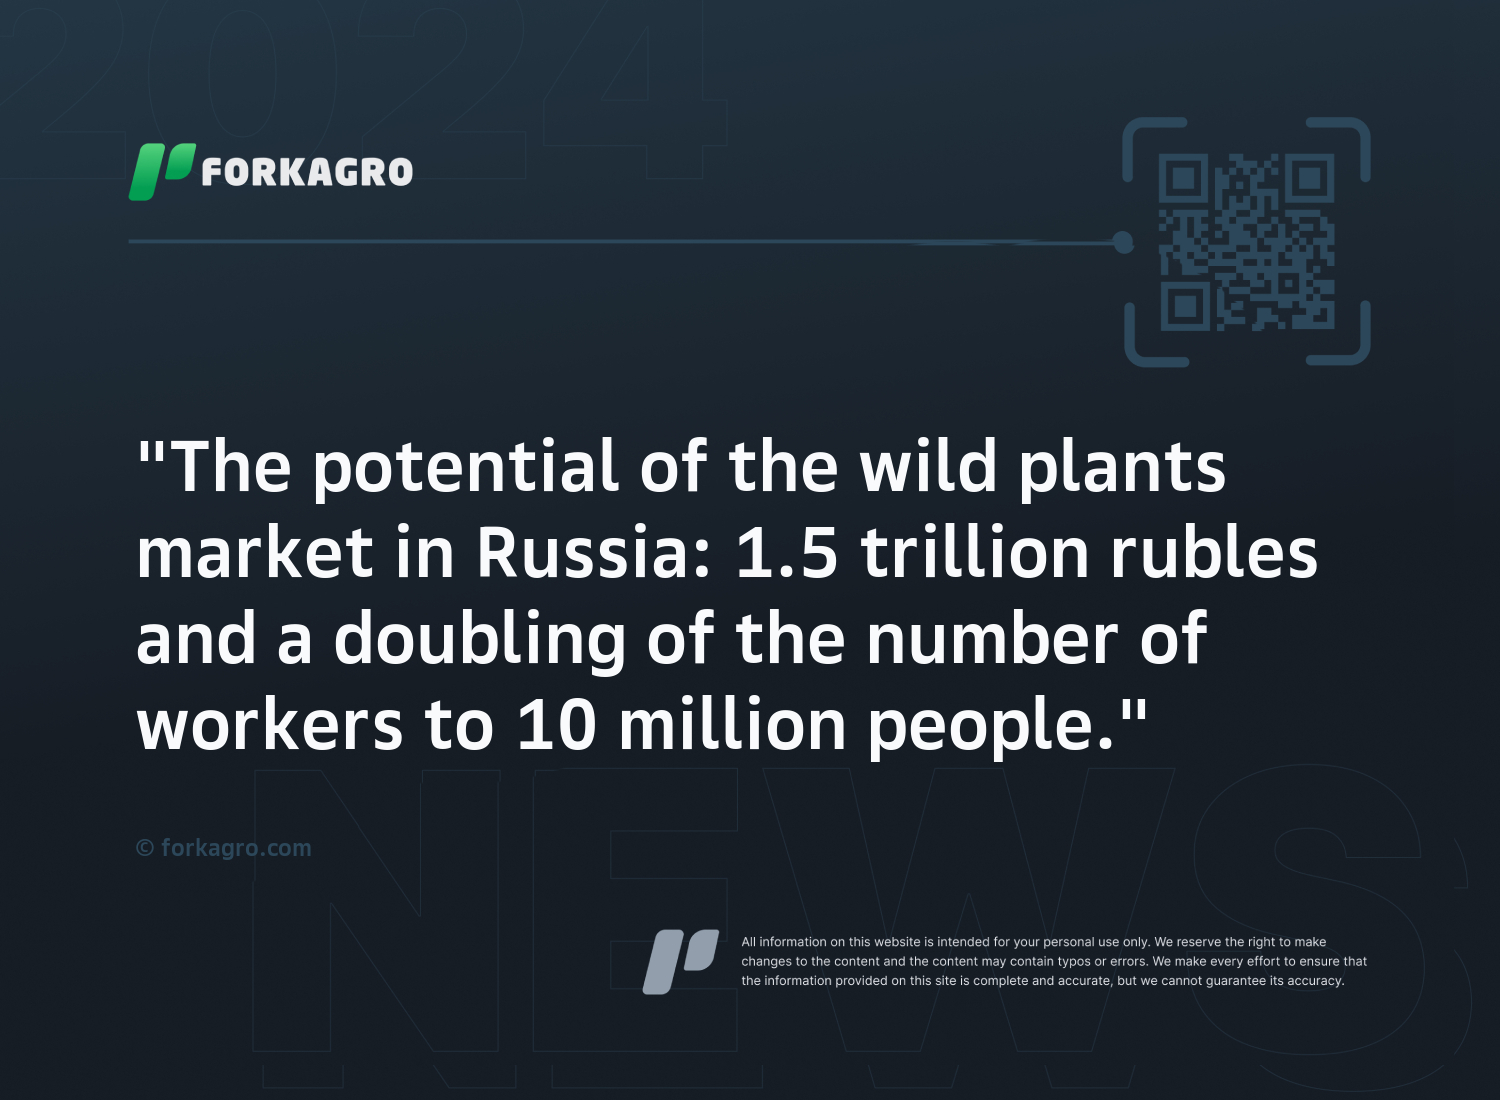 "The potential of the wild plants market in Russia: 1.5 trillion rubles and a doubling of the number of workers to 10 million people."